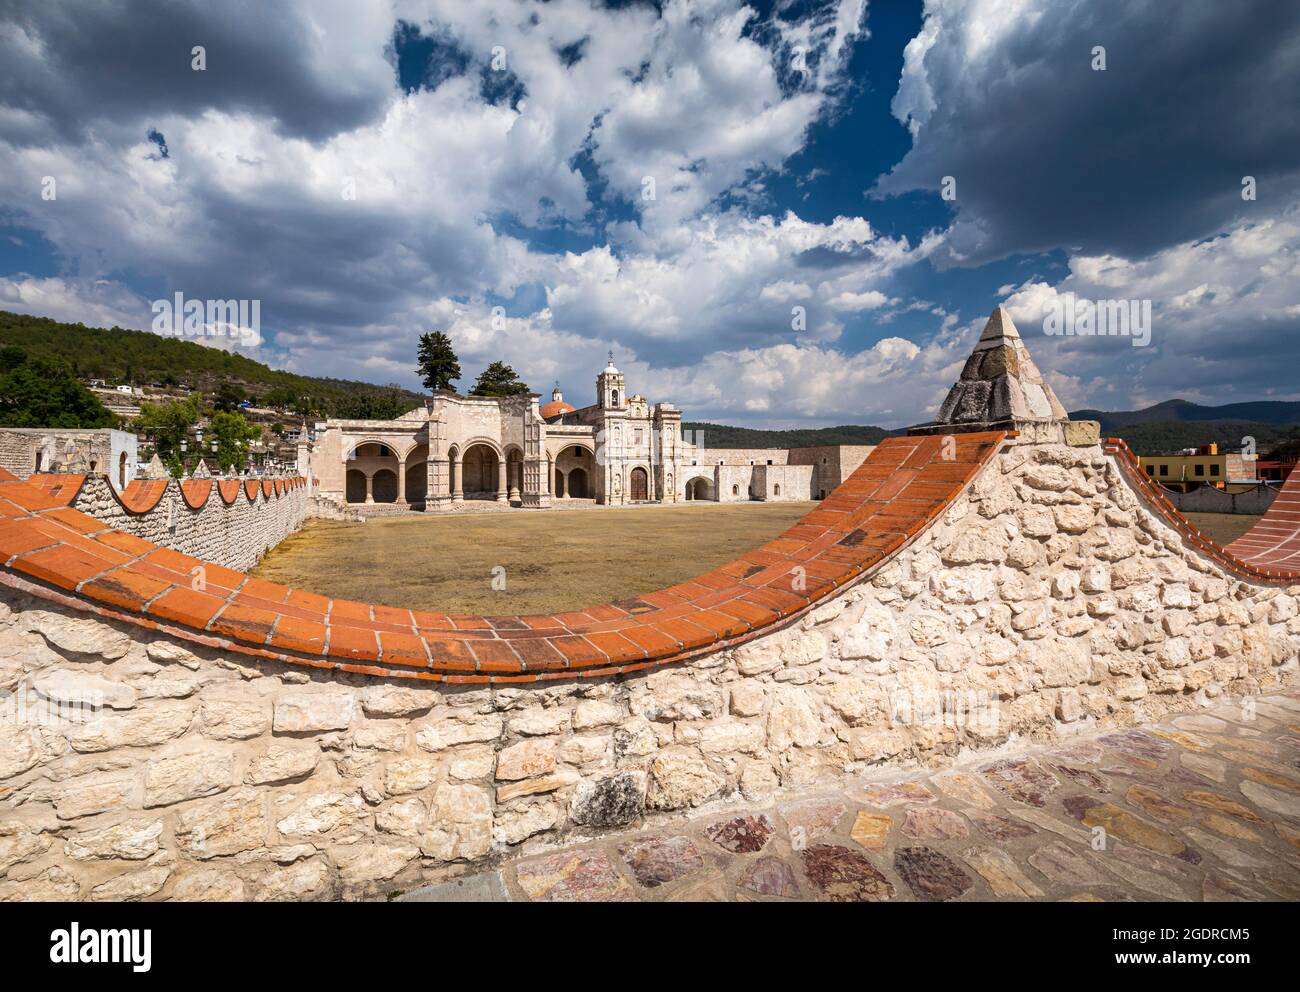 Temple and ex-convent of San Pedro y San Pablo with its capilla abierta or open chapel in Teposcolula, Oaxaca, Mexico. Stock Photo